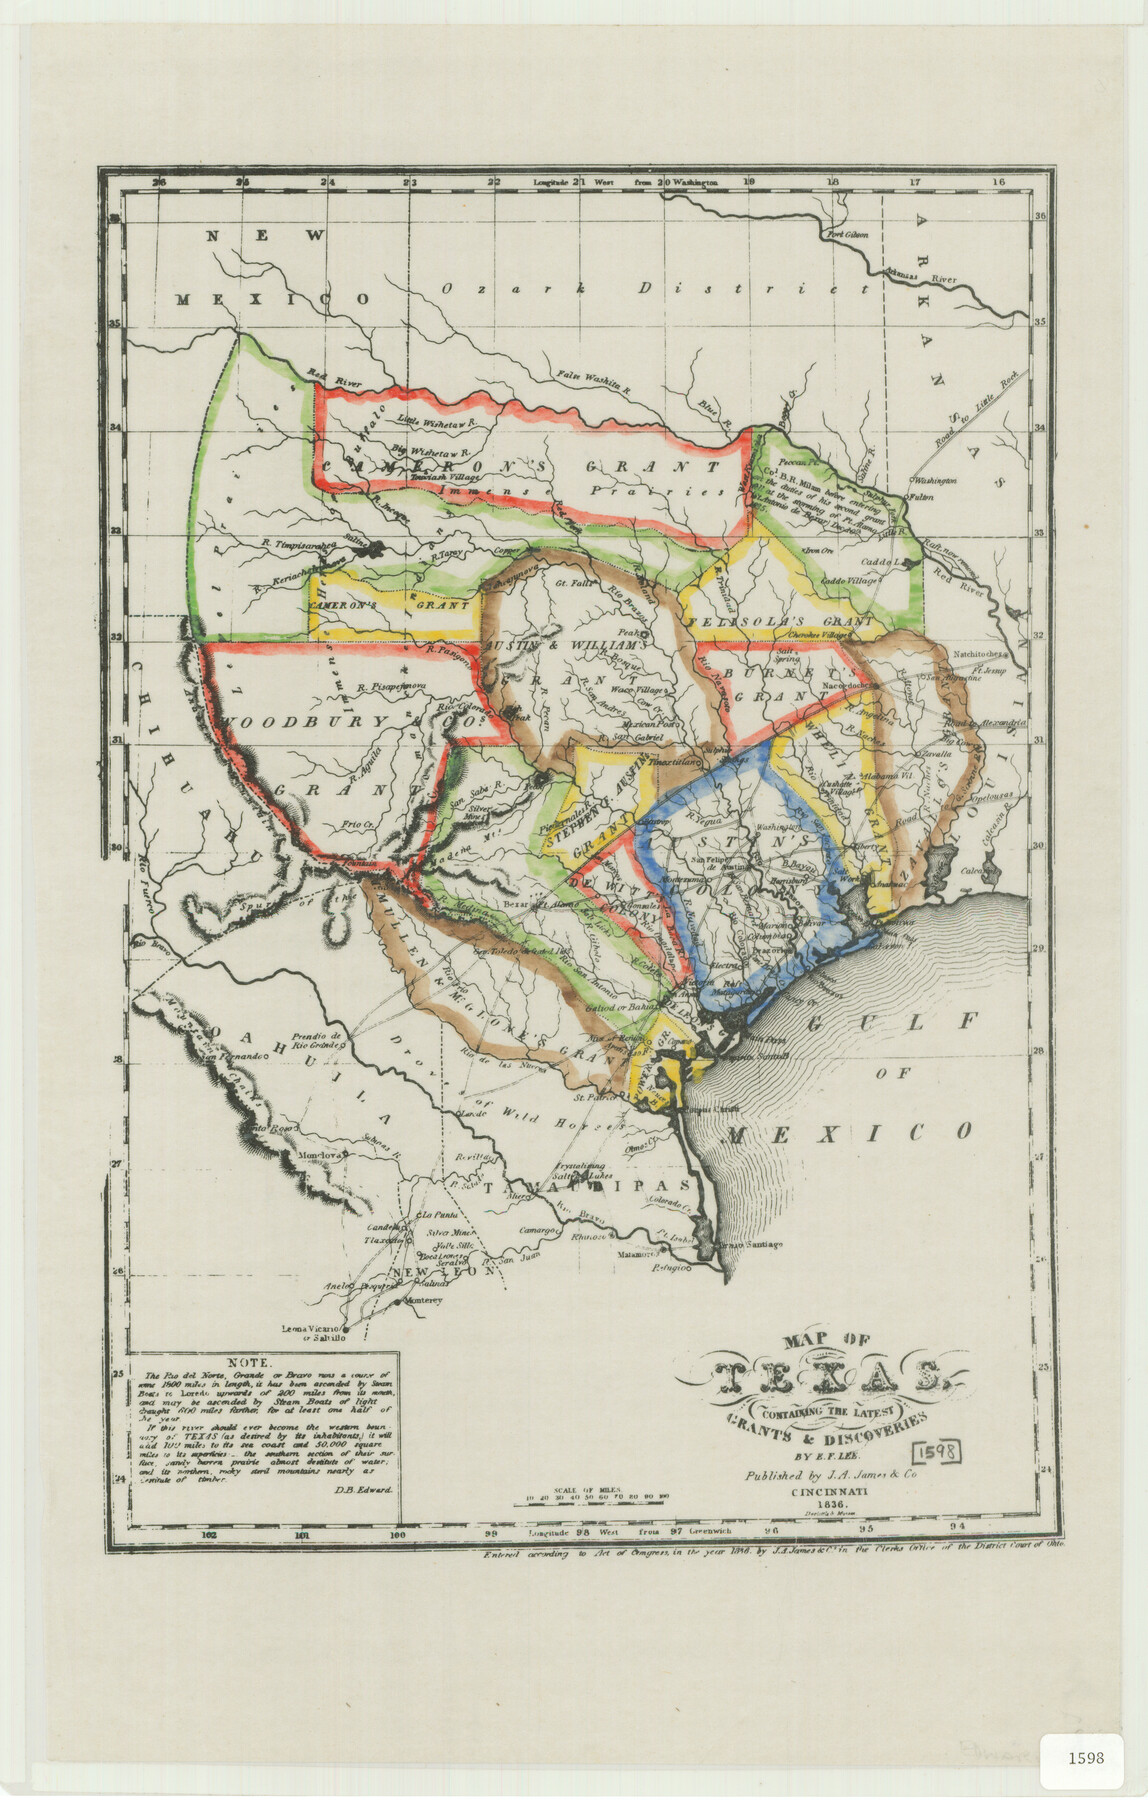 76245, Map of Texas Containing the Latest Grants and Discoveries, Texas State Library and Archives